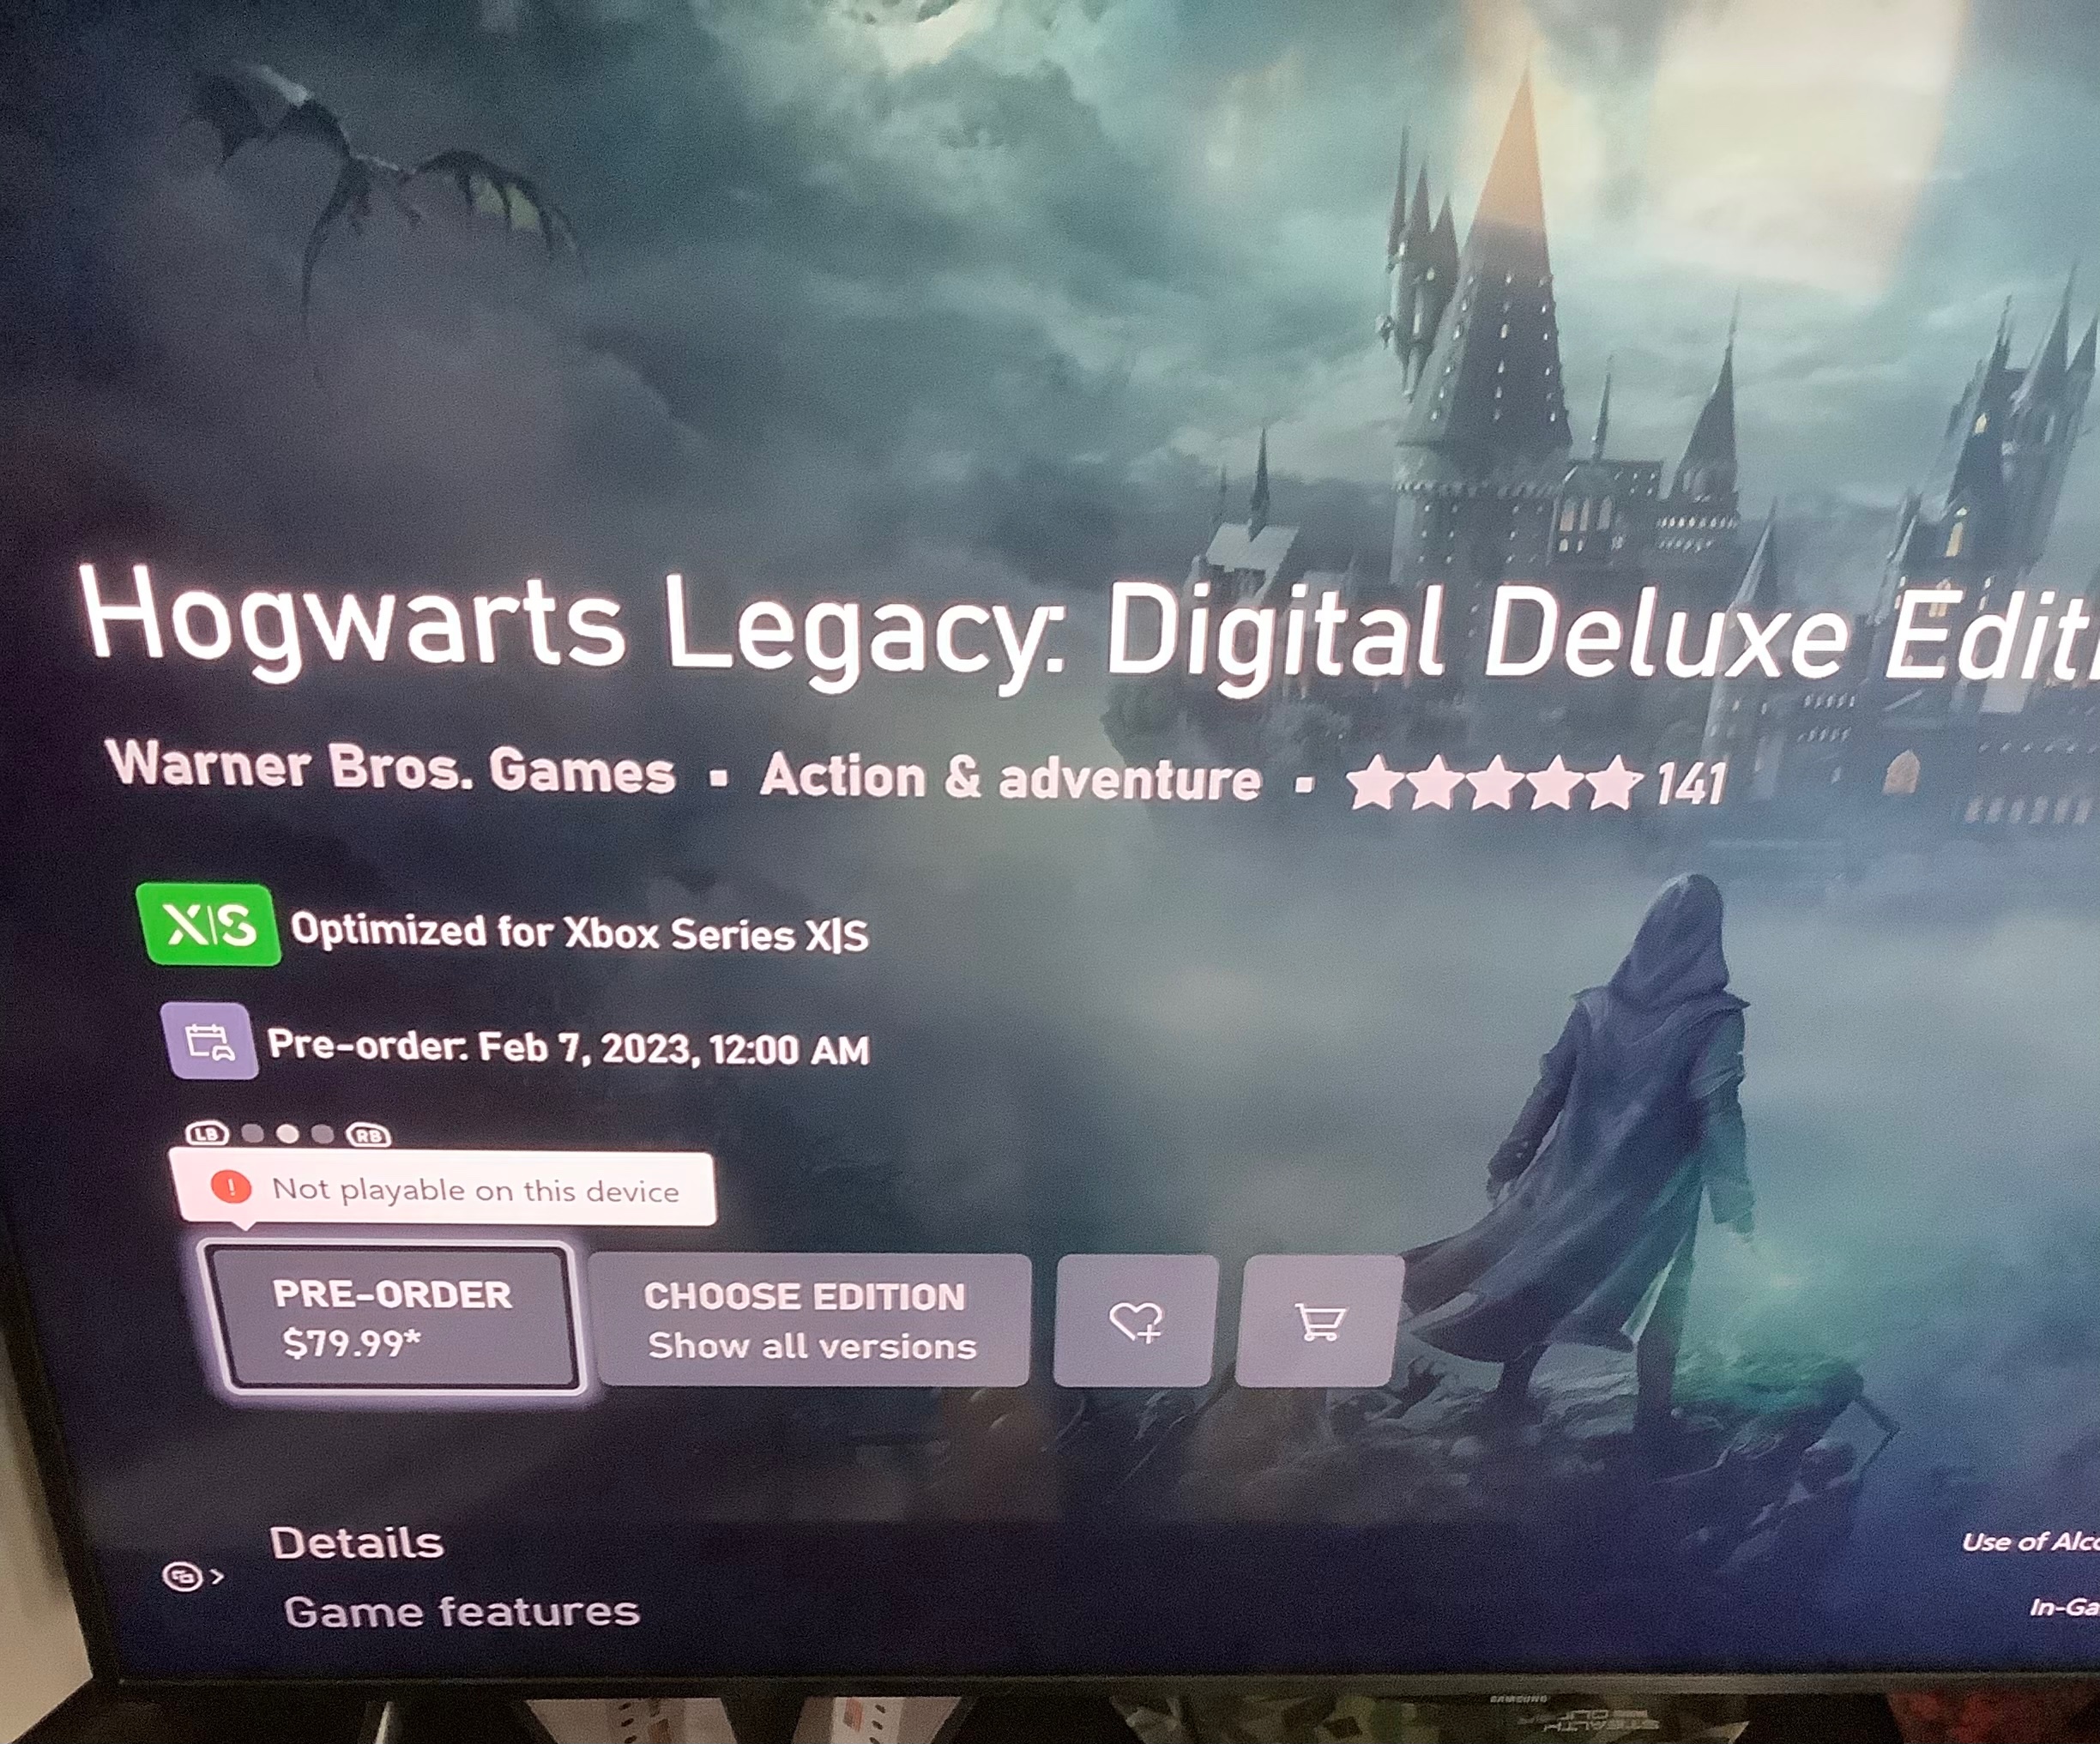 Not playable on this - Community device? Microsoft